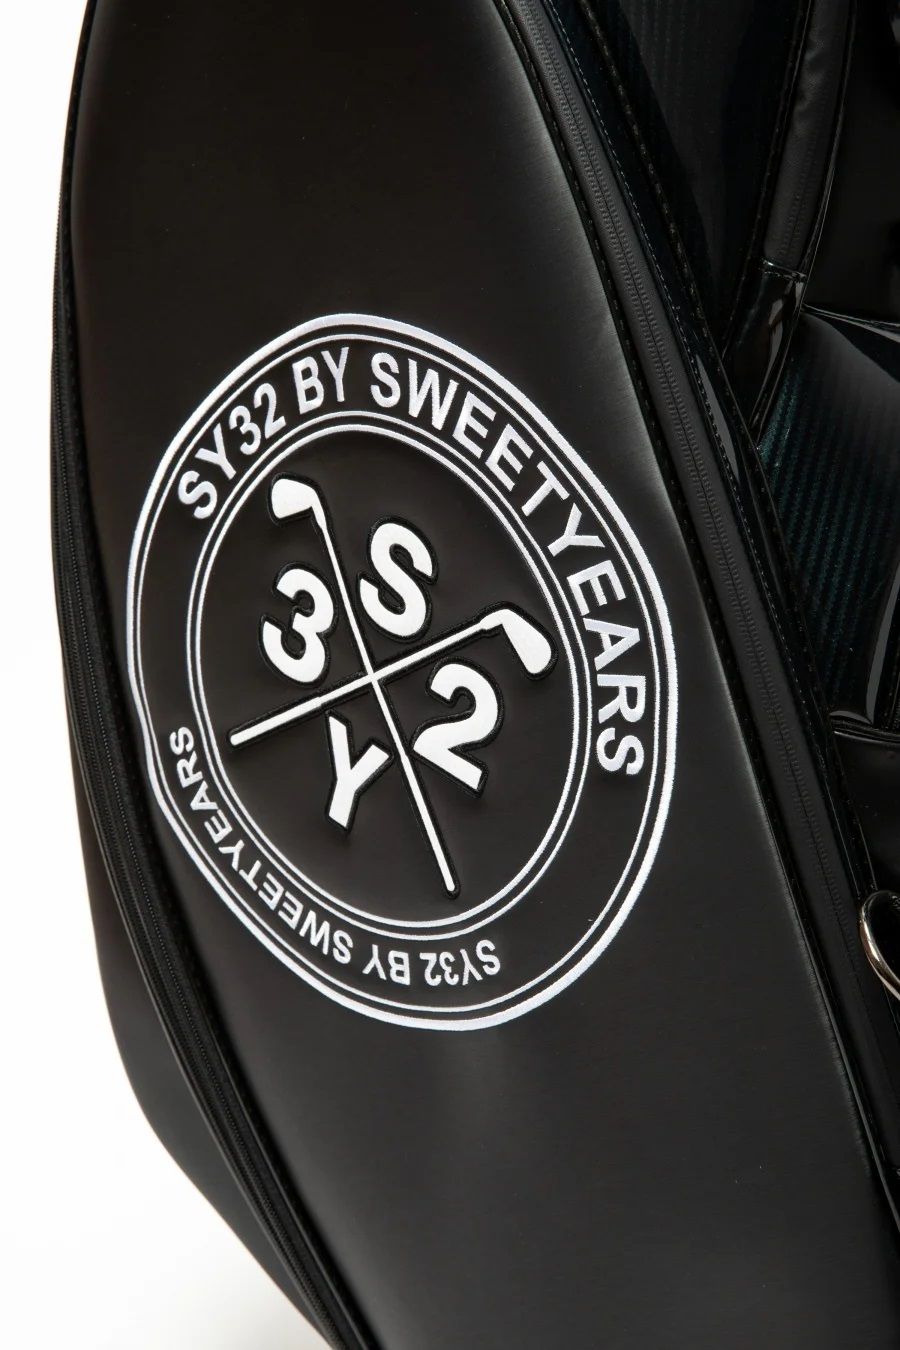 SY32 by SWEET YEARS - SYG LOGO CADDY BAG | キャディバッグ ...